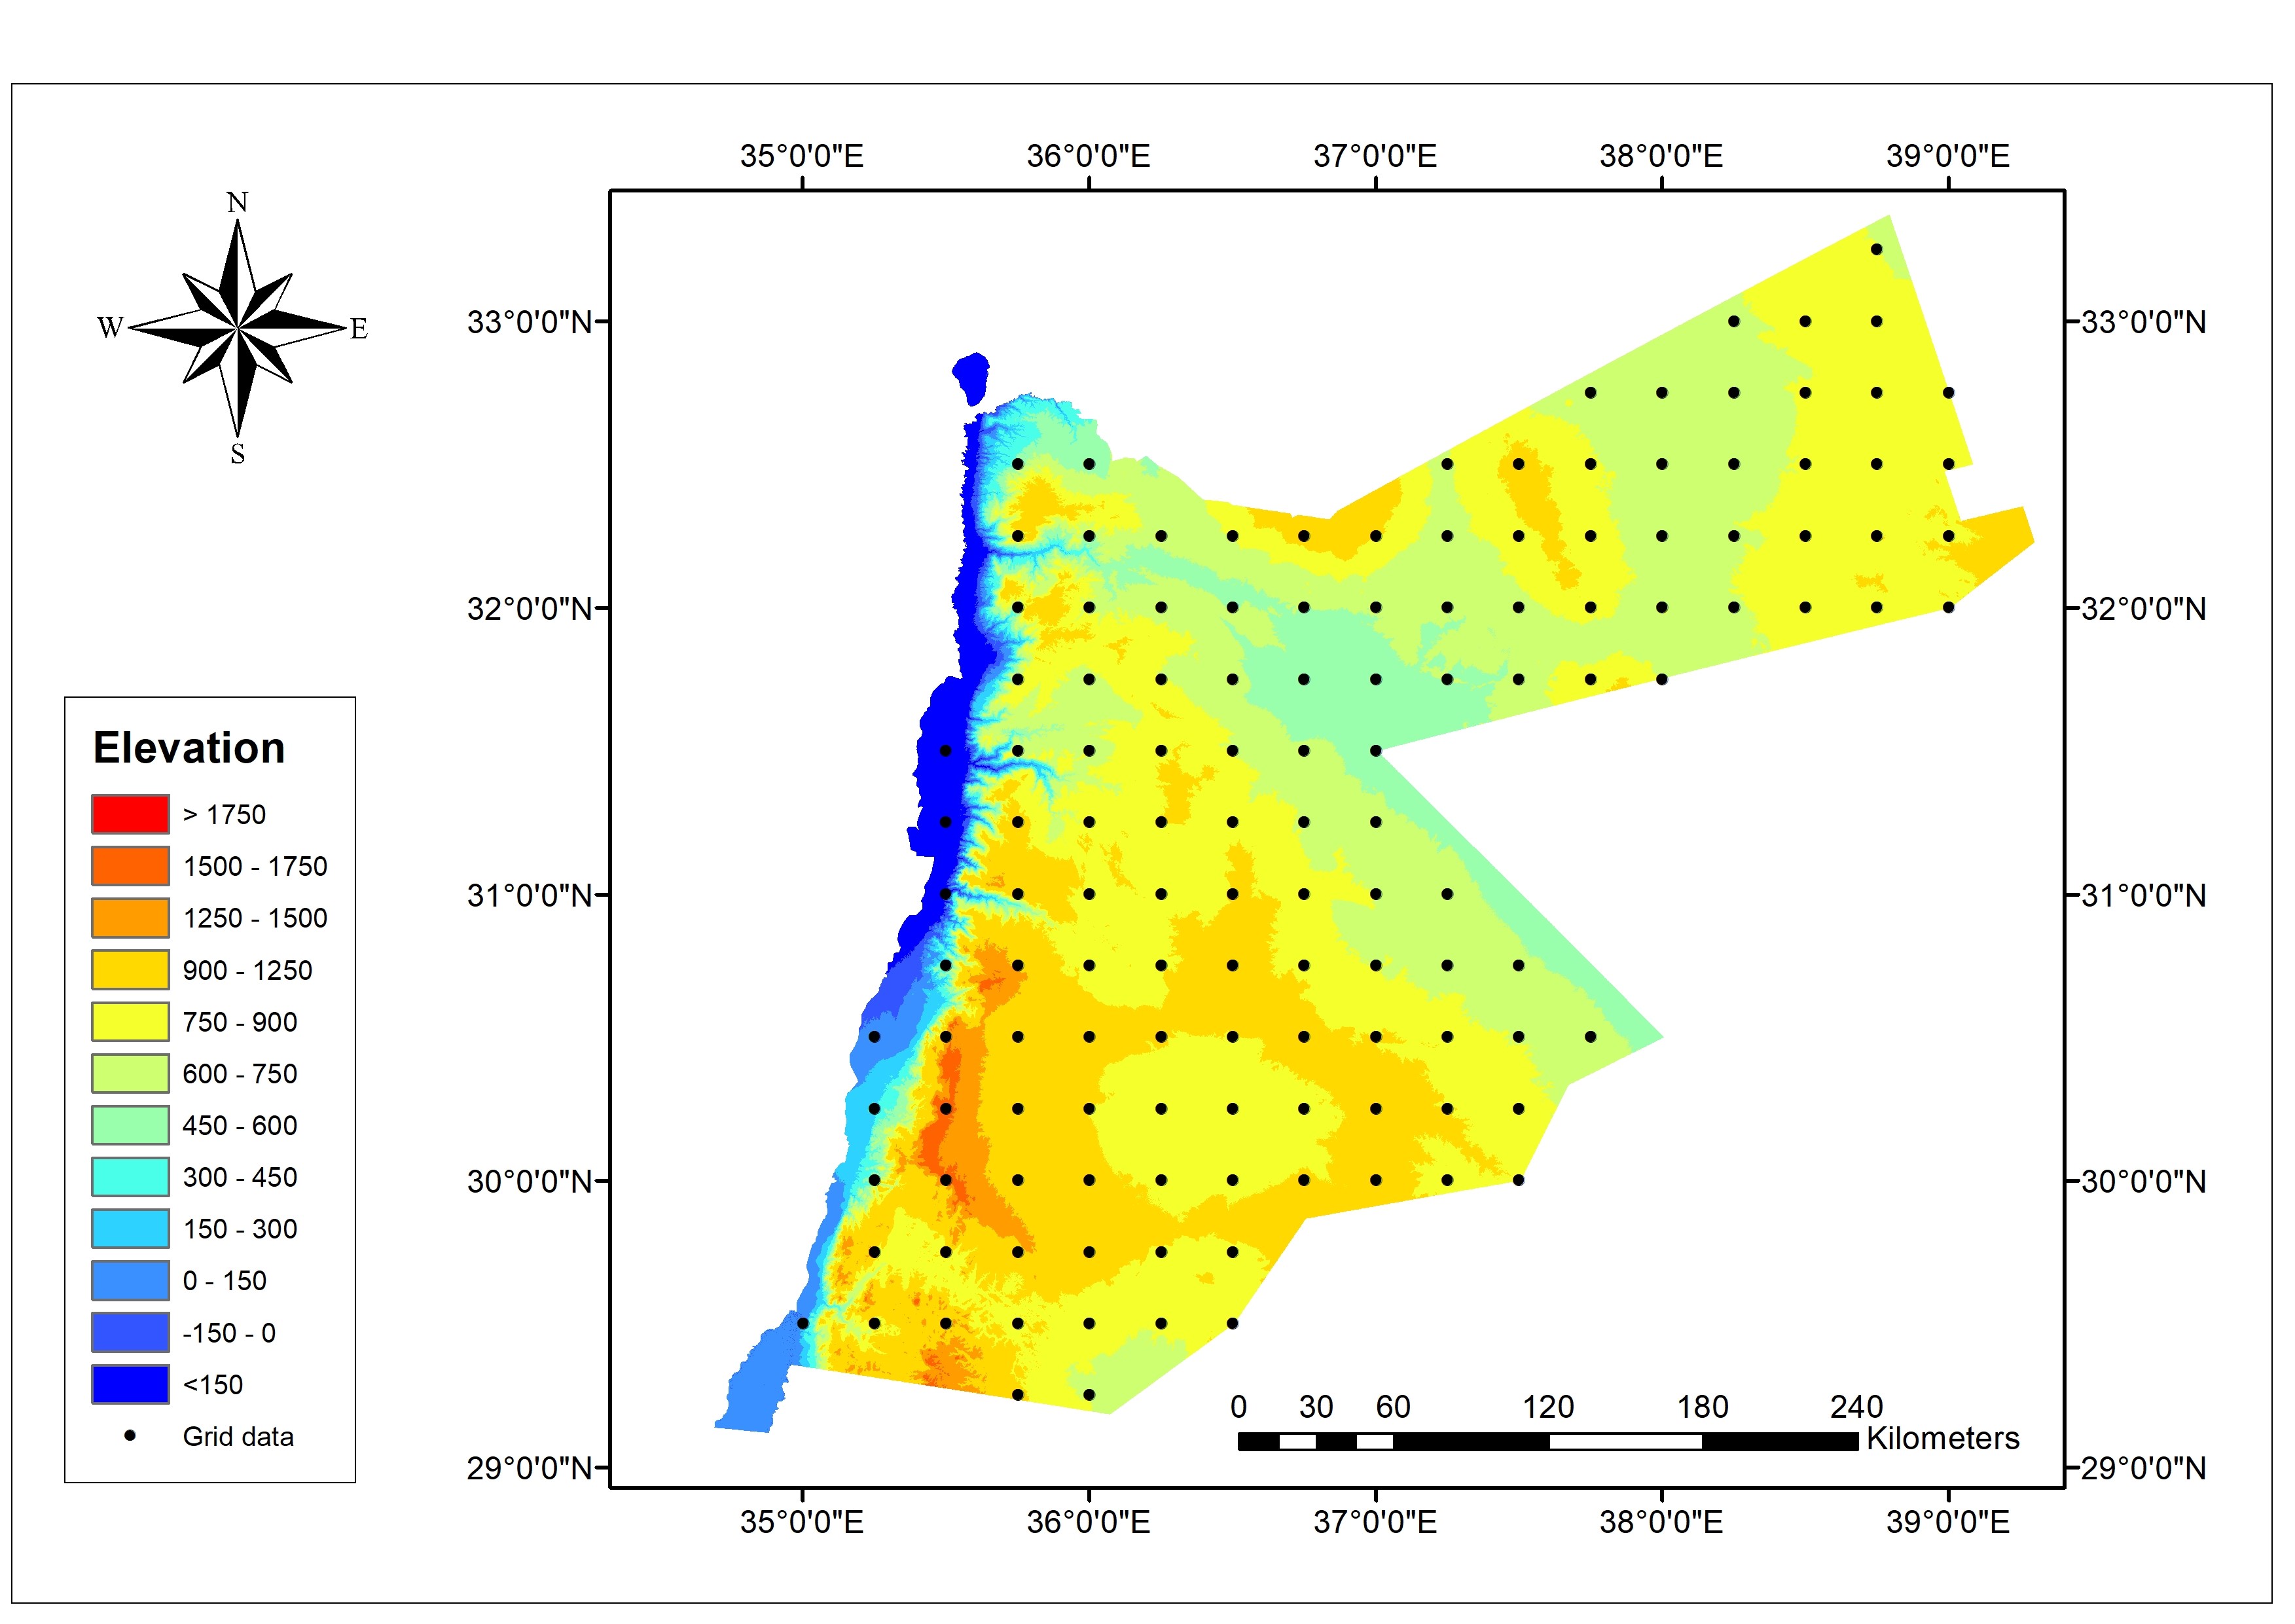 A map of Jordan illustrating the geographical topography and the domain of the grid points used in the model simulation (Atashi 